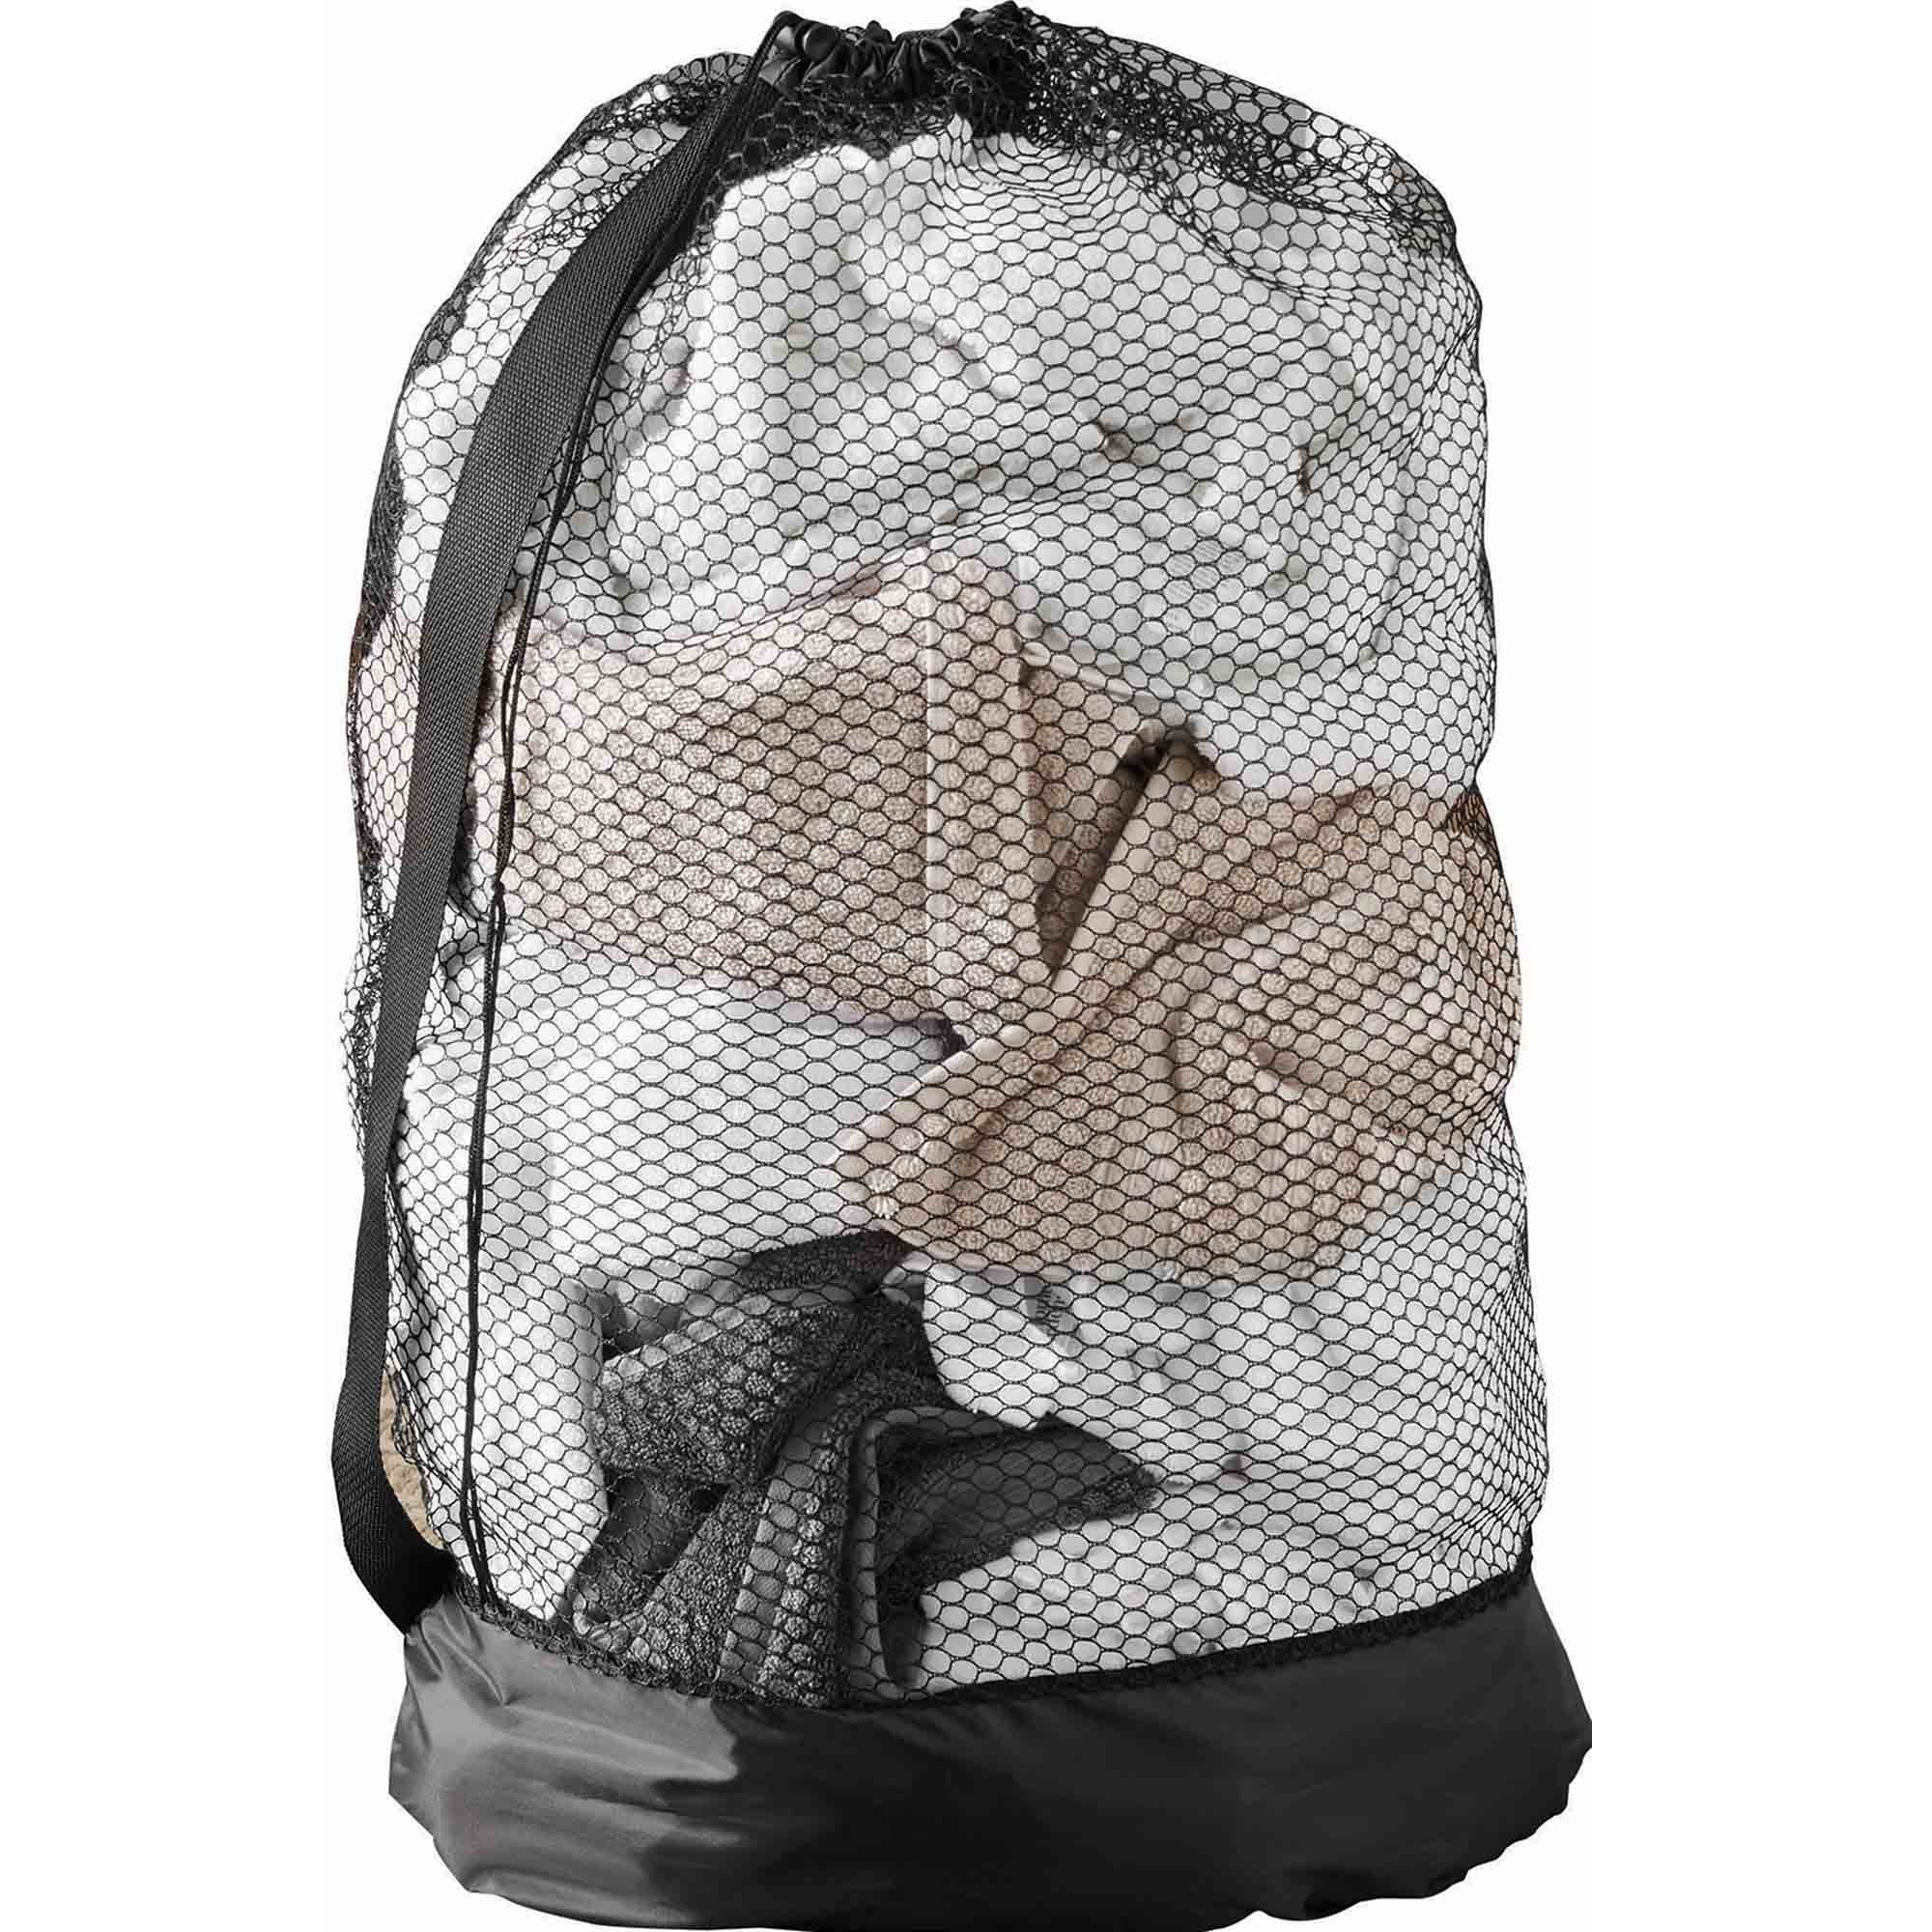 4 Pc Extra Large Mesh Laundry Bags Drawstring Handle 36 x 24 Lingerie Delicates 